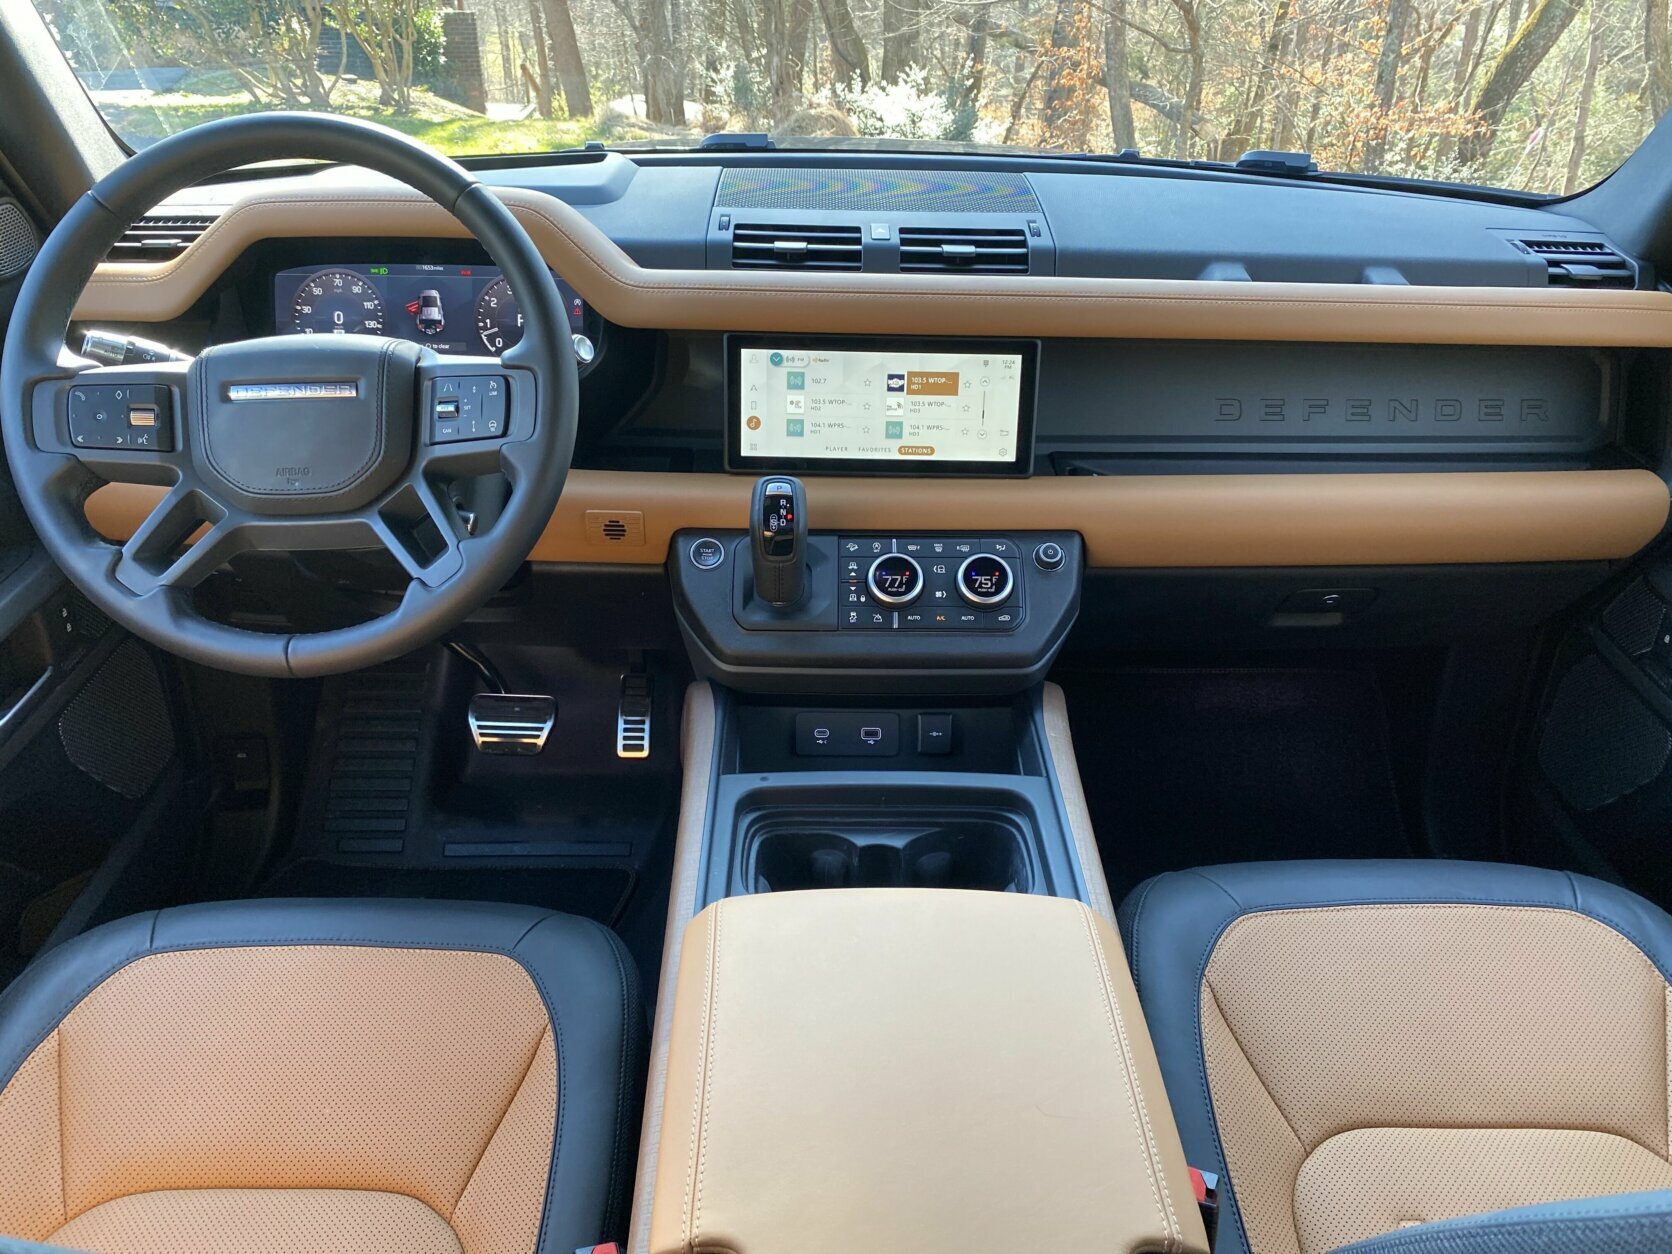 Car Review: The Land Rover Defender X is ready for snow — and anything else  - WTOP News